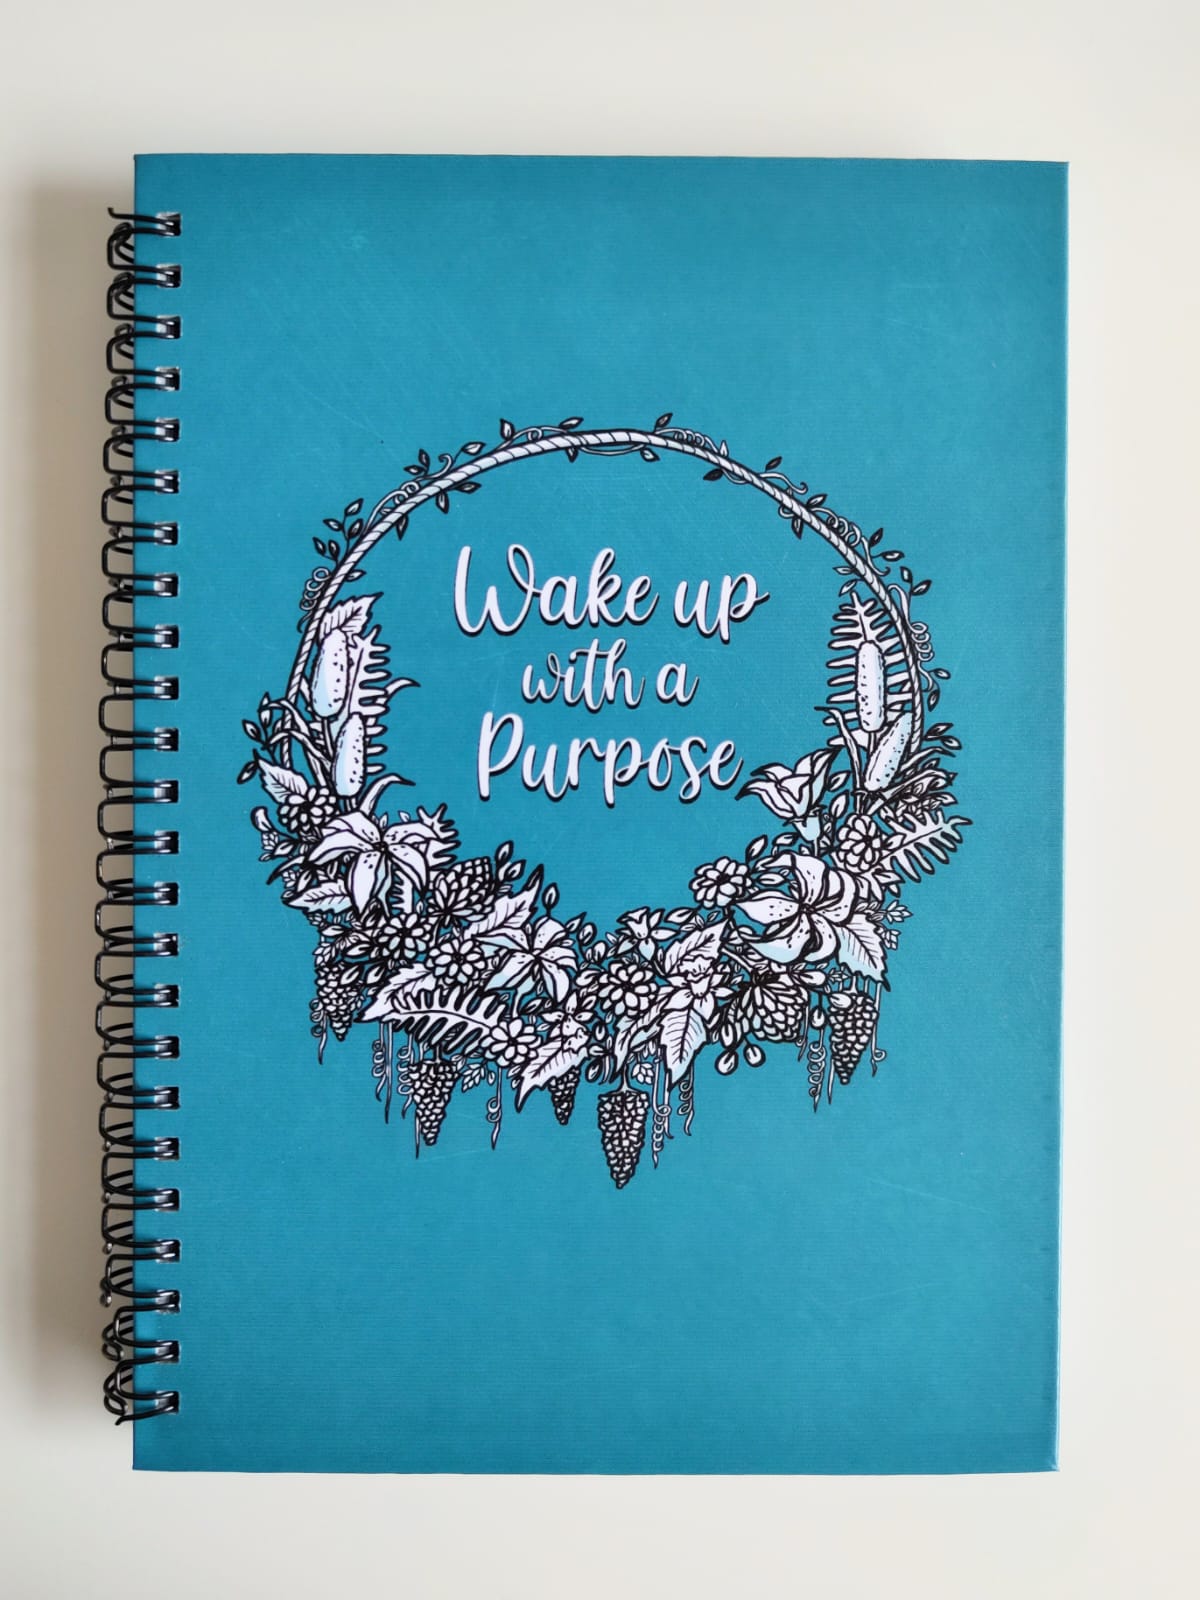 Wake Up With a Purpose  Notebook Whimsy Journal